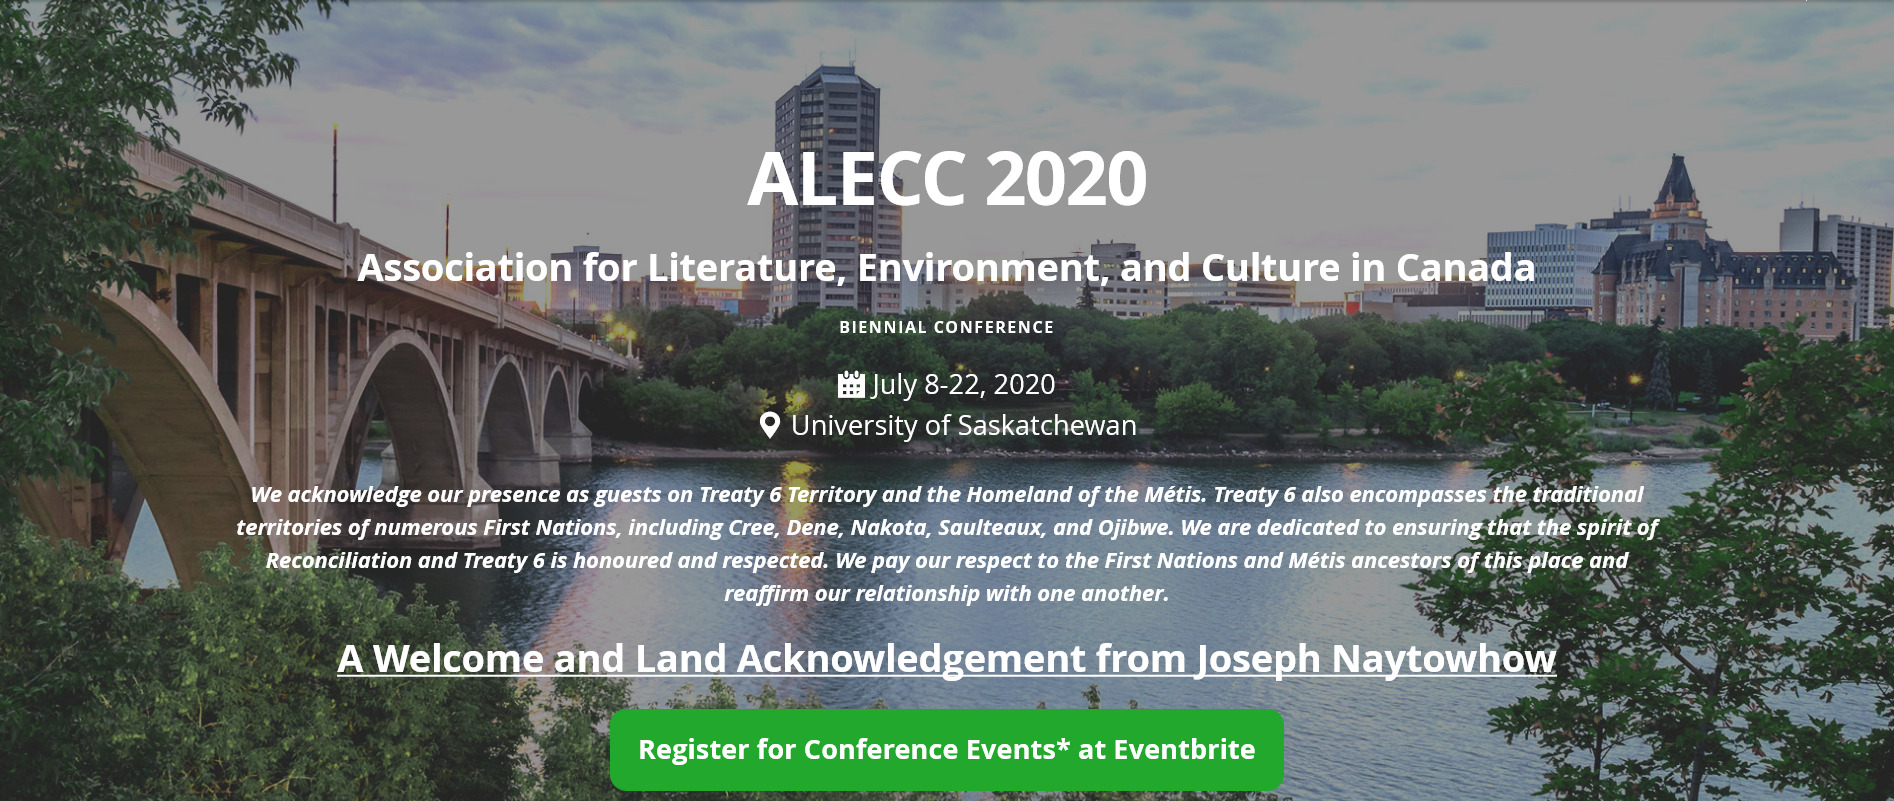 “Watershed, lit., fig”: 2020 Association for Literature, Environment, and Culture in Canada (ALECC) biennial conference